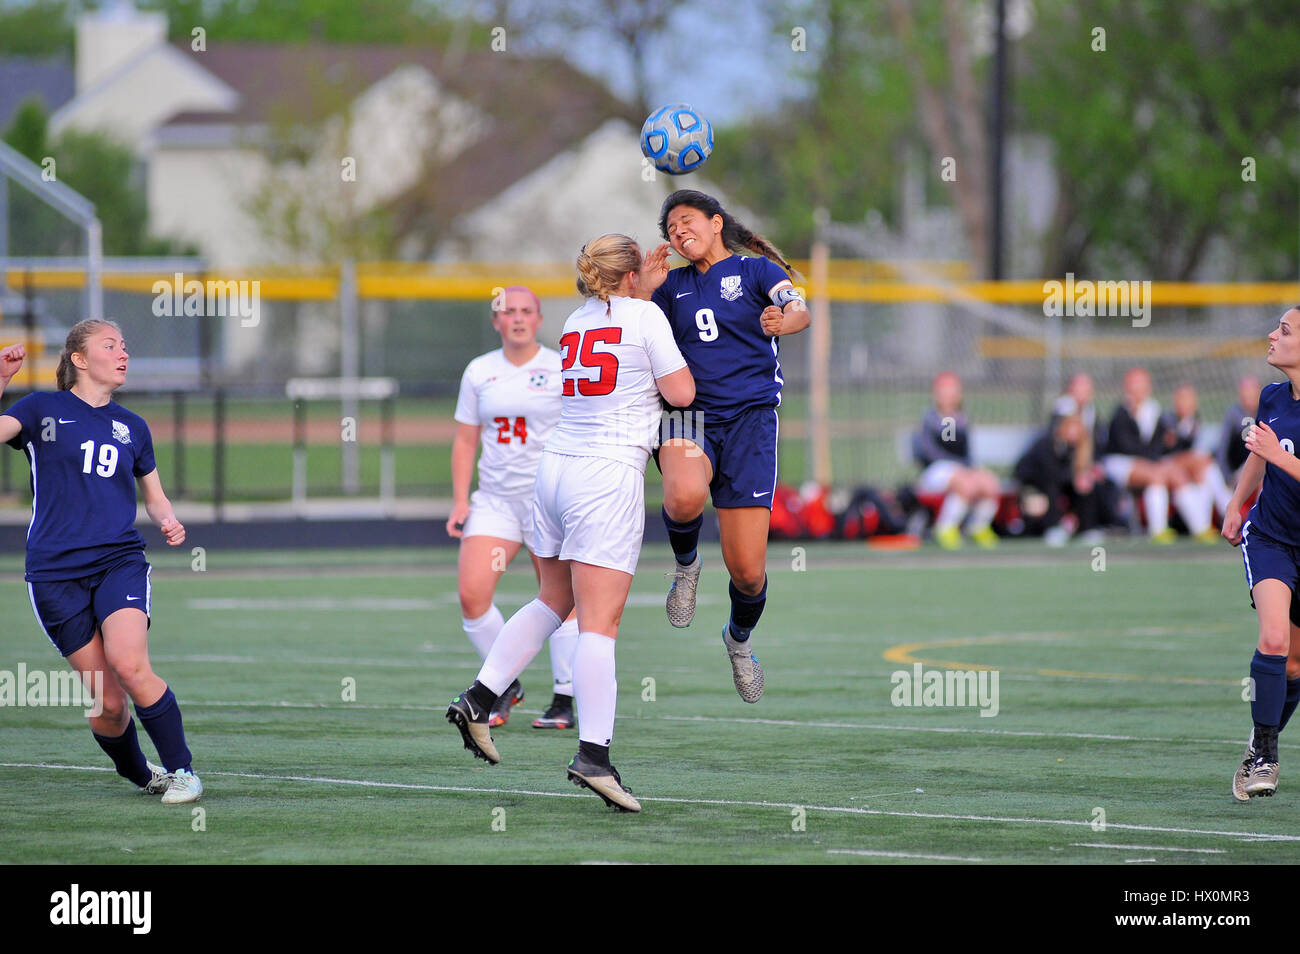 Player executing a header over a defender during a high school match. USA. Stock Photo